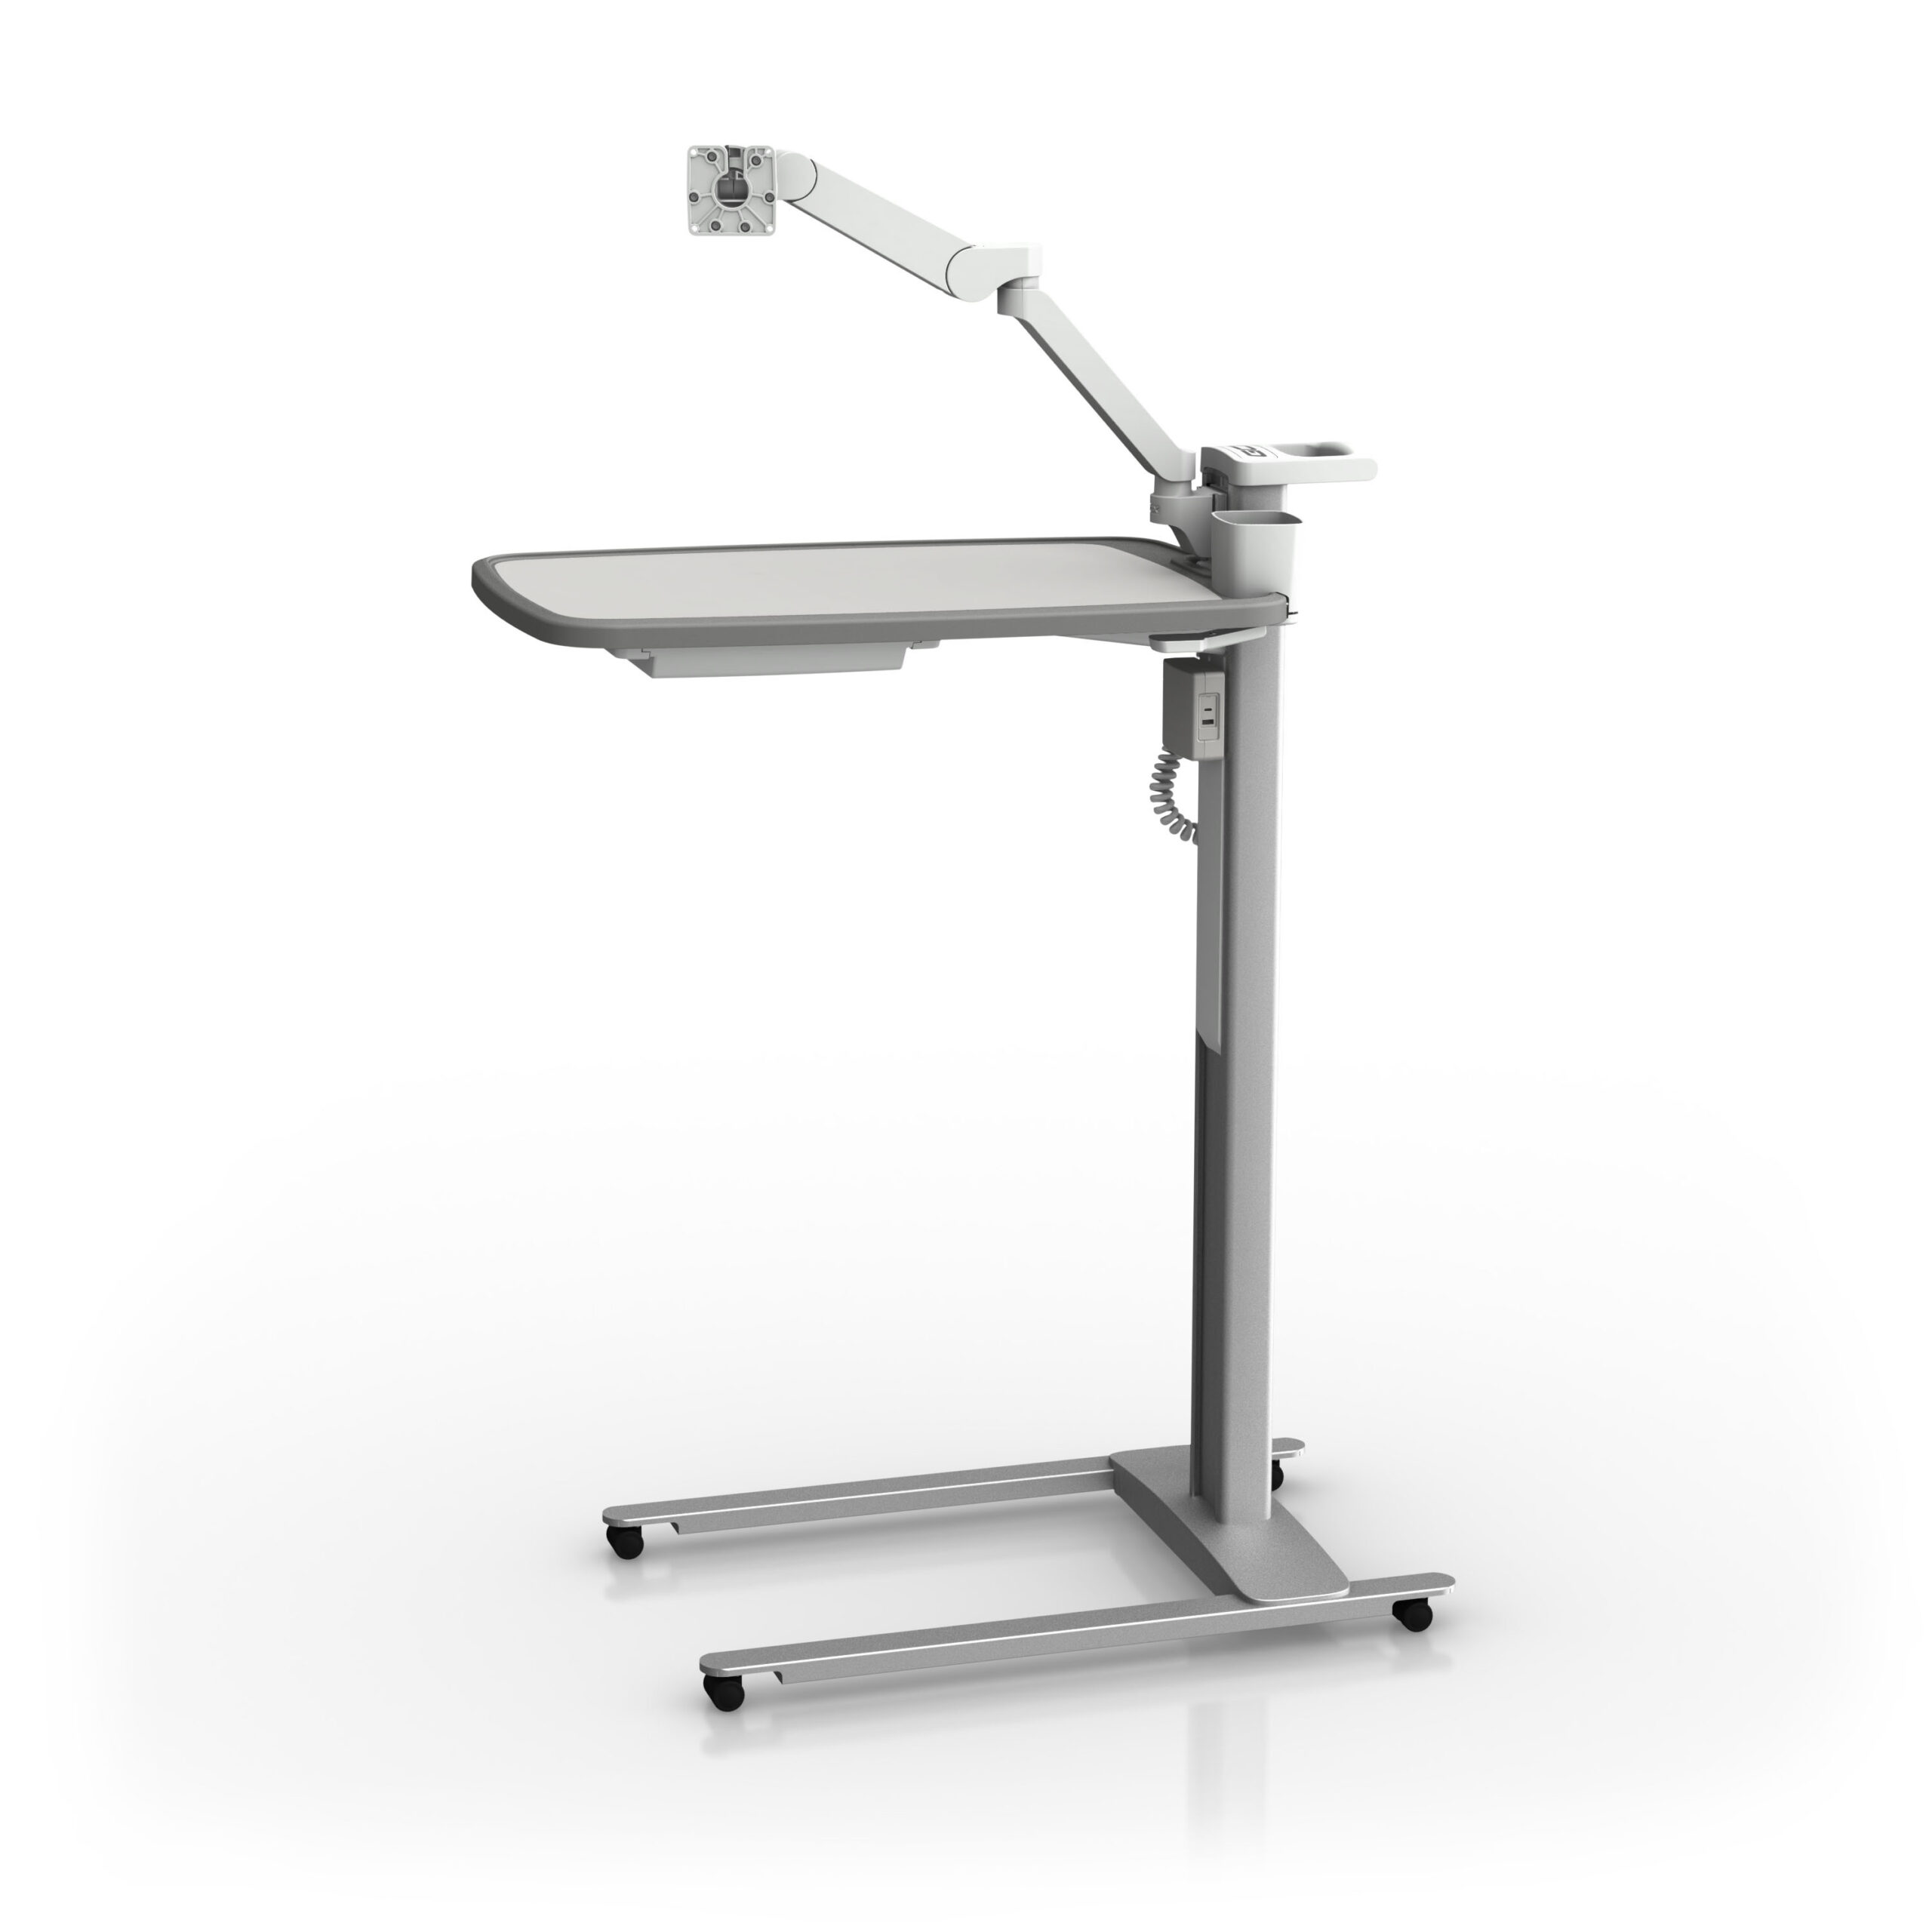 OBT-0011-61-02-44 - OBT-0011-61-02-44 – Folkstone Gray Patient Engagement Overbed Table with PRO-ADJUST™ Tablet Arm